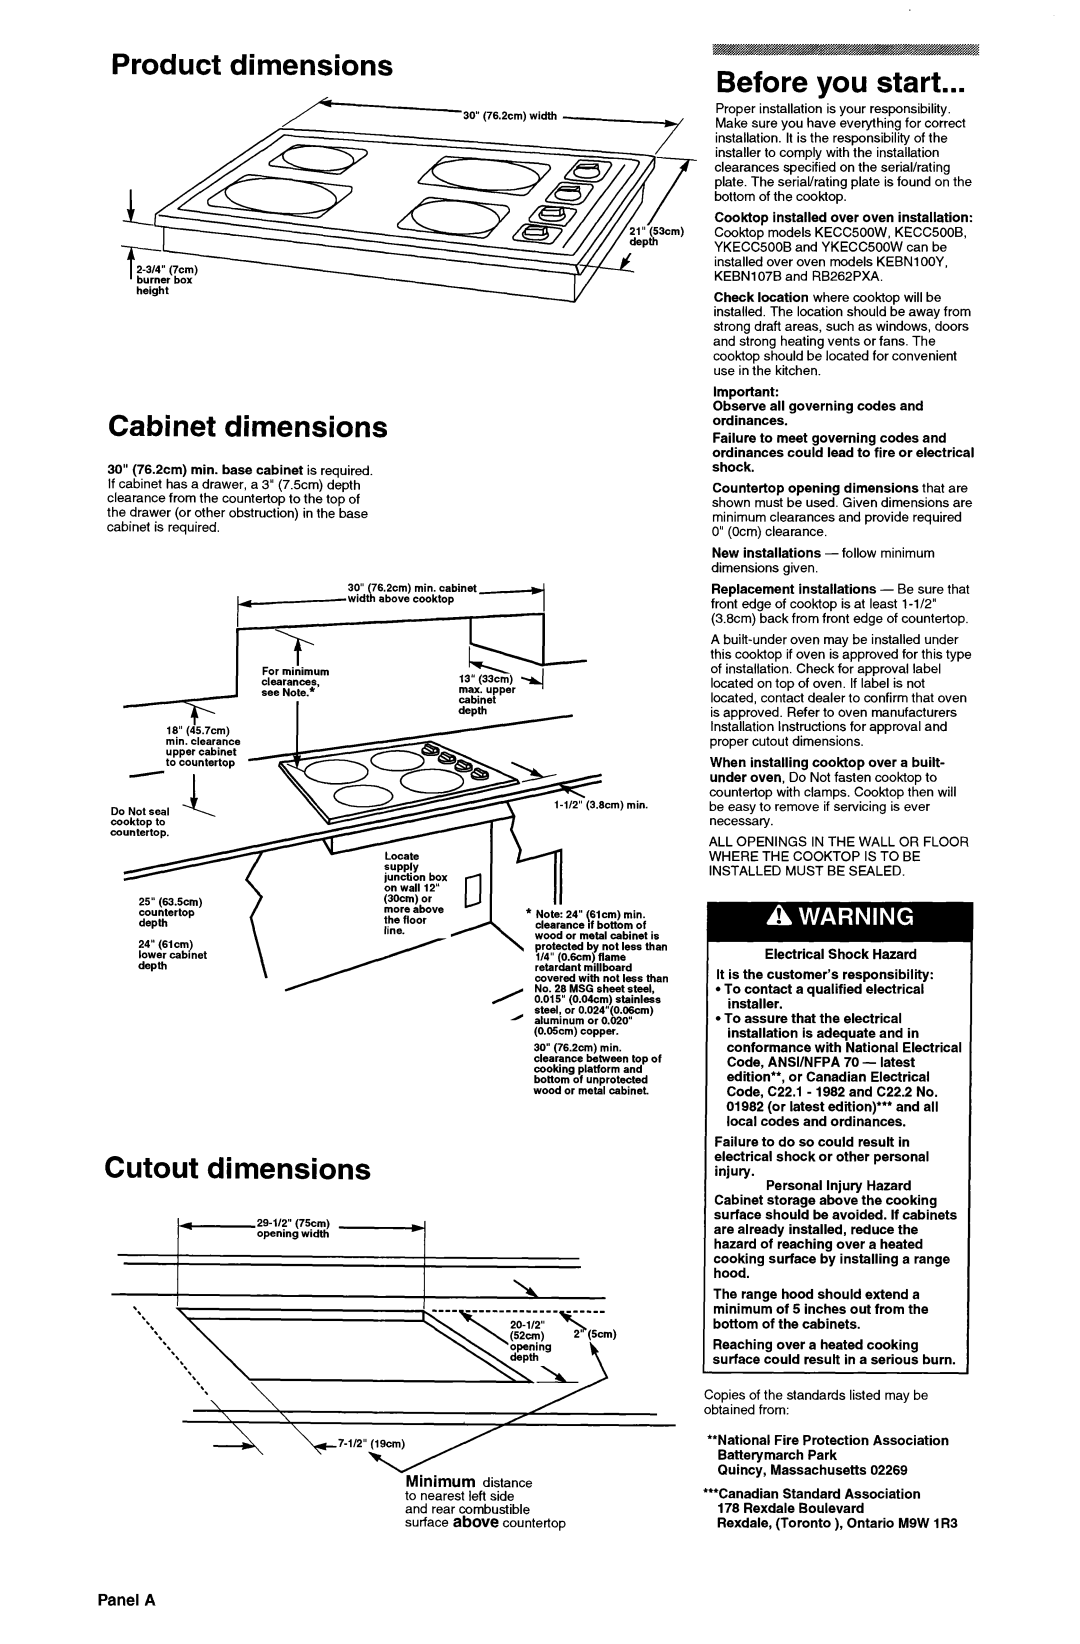 KitchenAid 3188086 Product dimensions, Cabinet dimensions, Before you start, Cutout dimensions, Minimum distance, Panel A 